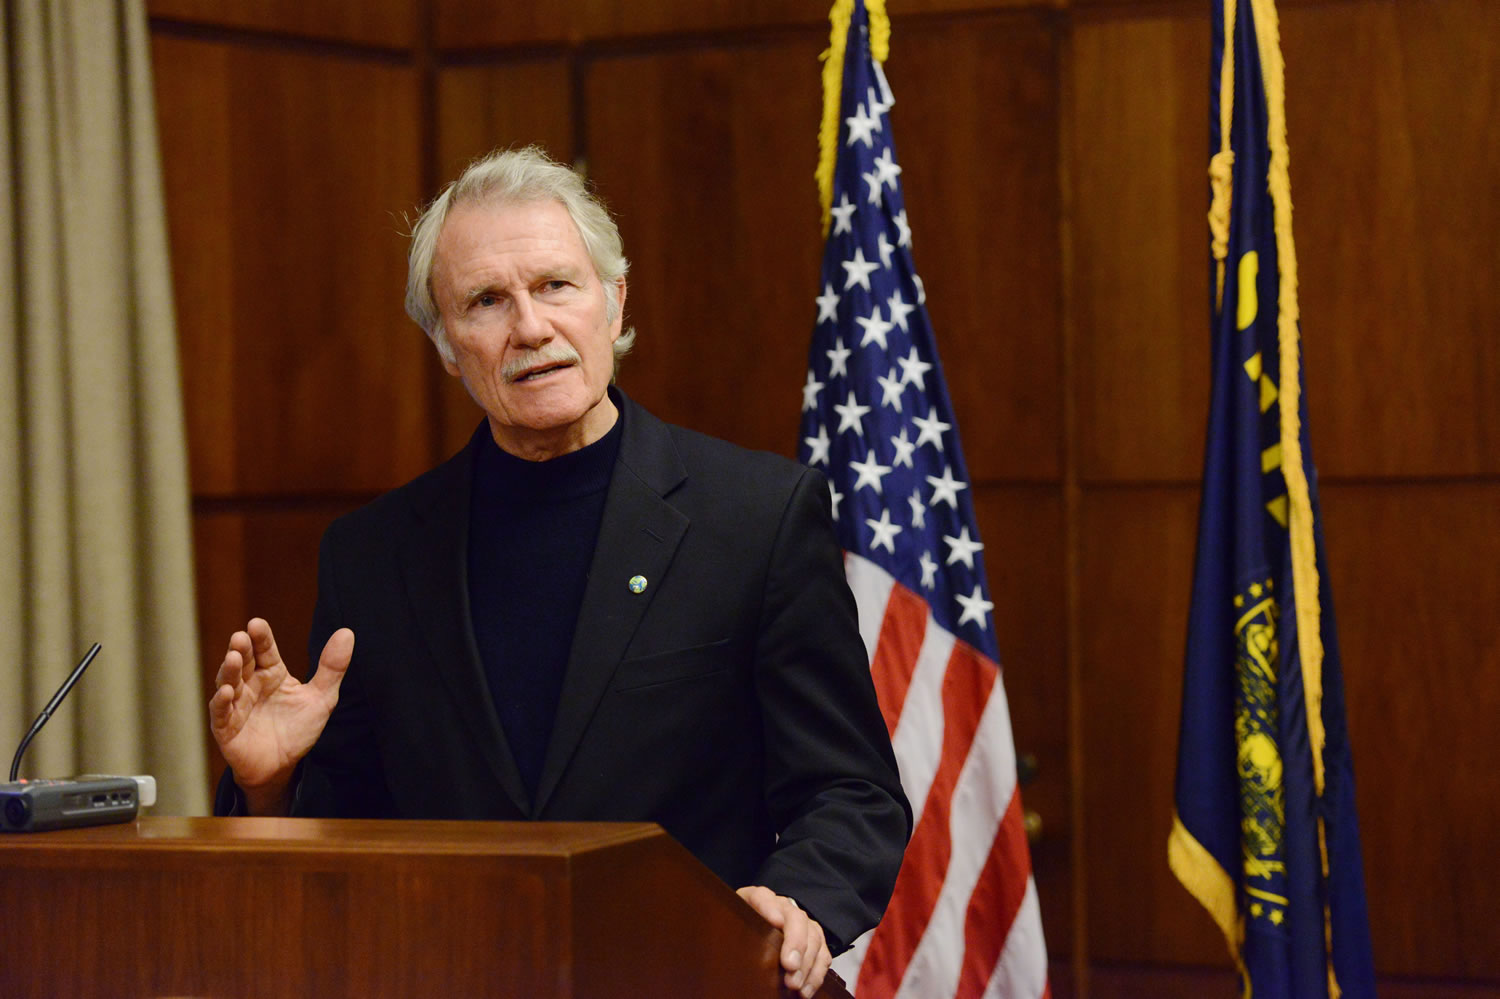 Gov. John Kitzhaber addresses the press on the third day of the special session at the Oregon State Capitol in Salem on Wednesday, Oct. 2, 2013. The Oregon Legislature on Wednesday approved a series of bills on pensions, taxes and genetically modified crops, then adjourned a special session after three days of work.